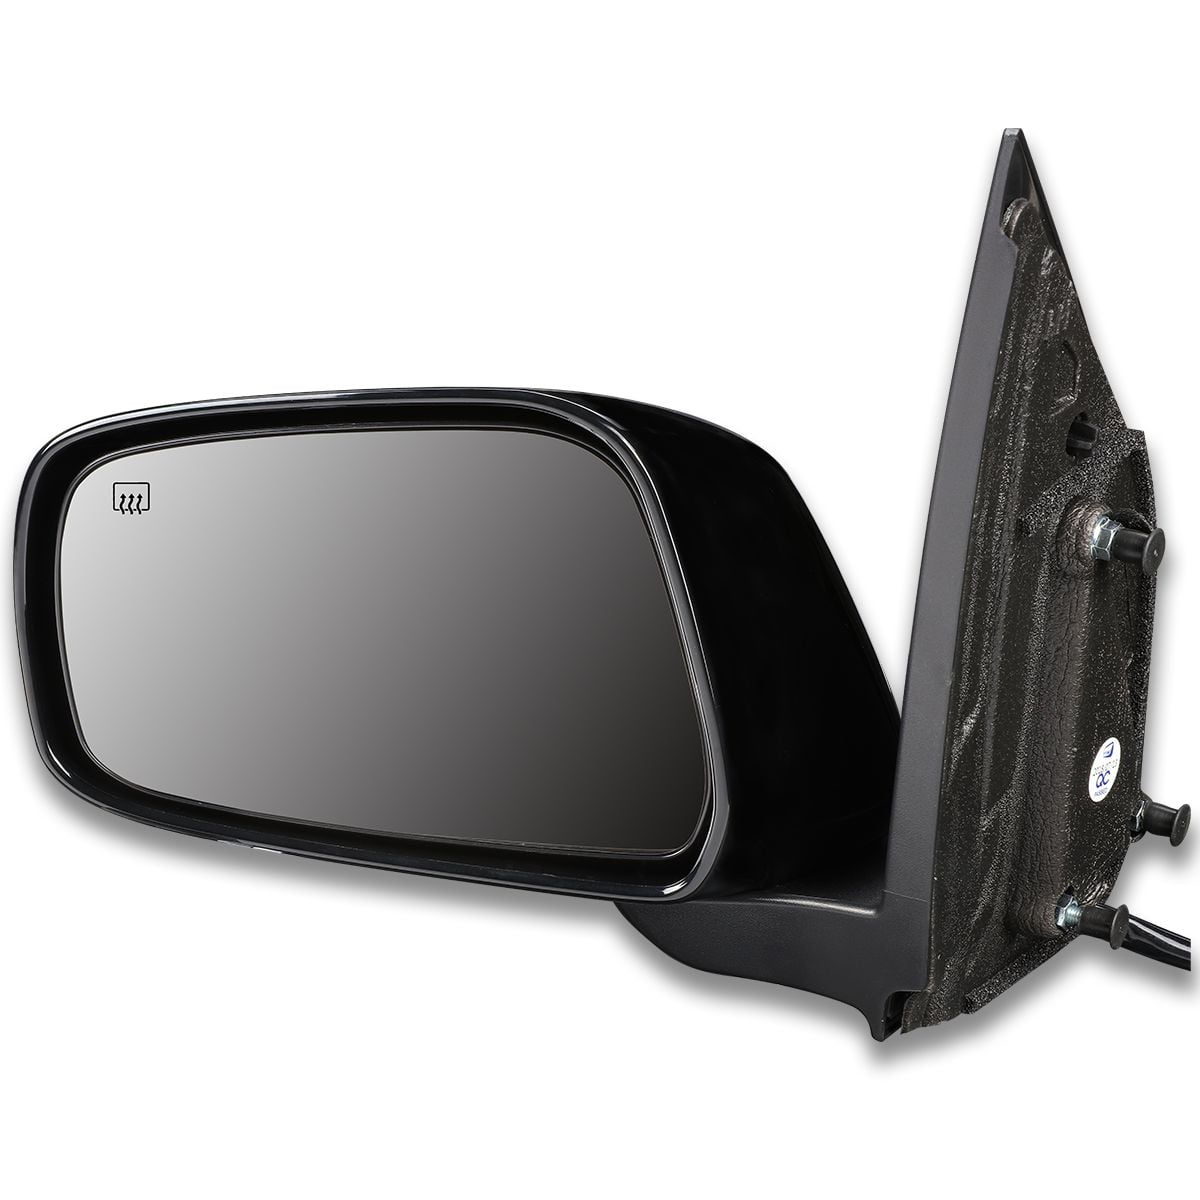 NI1320190 OE Style Powered+Heated Driver/Left Side View Door Mirror for Nissan Pathfinder 05-14 